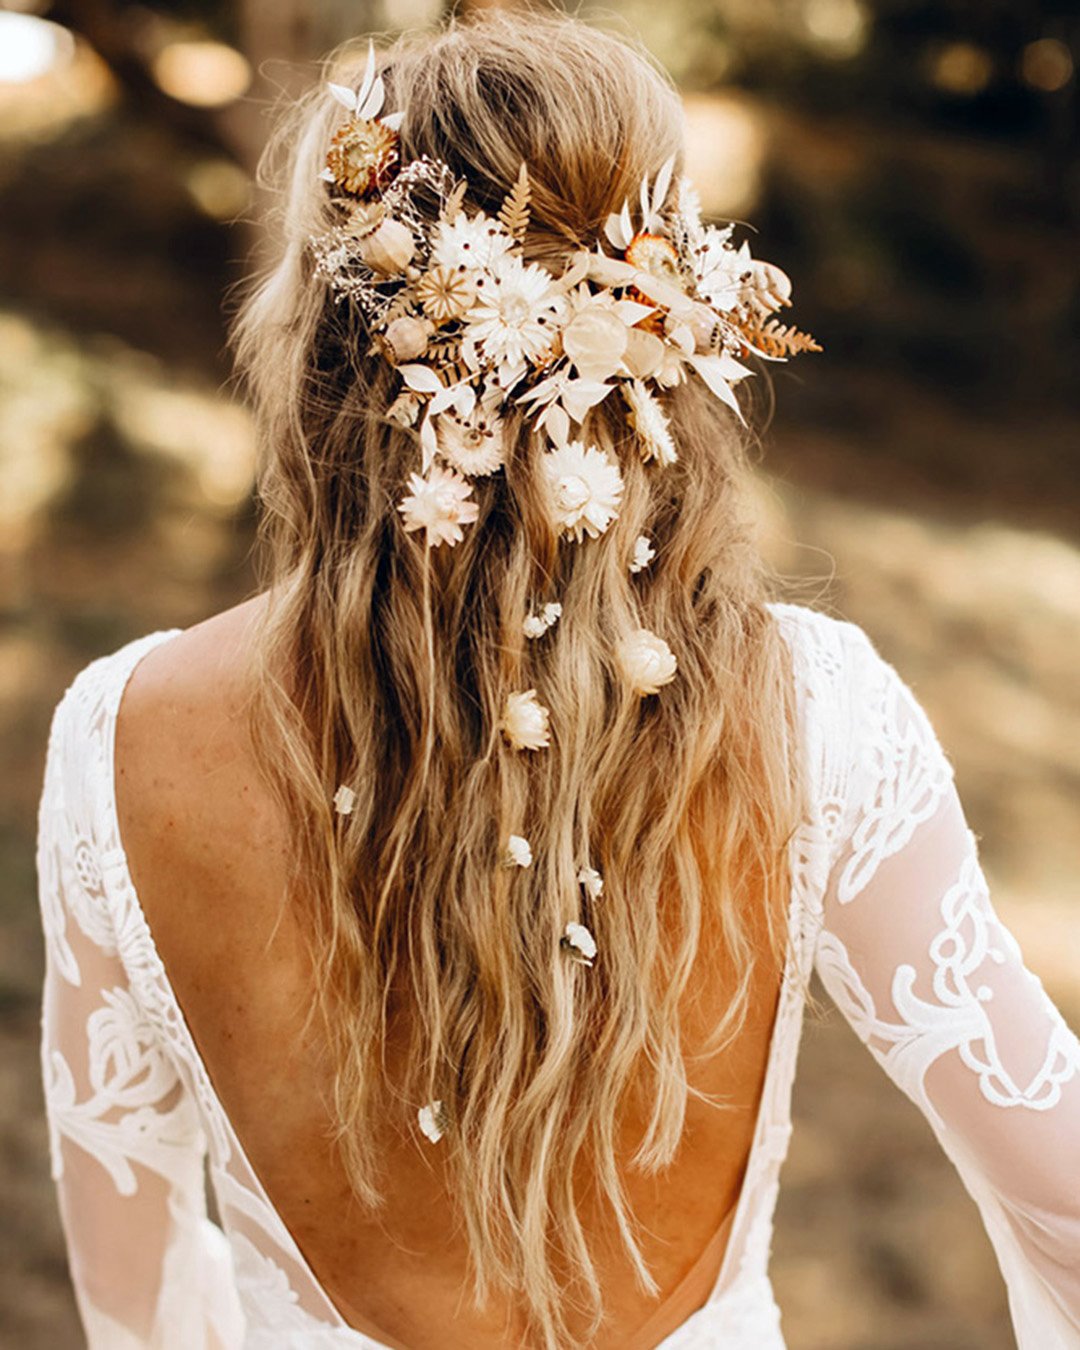 Cute and Stylish Hippie Hairstyles | StyleWile